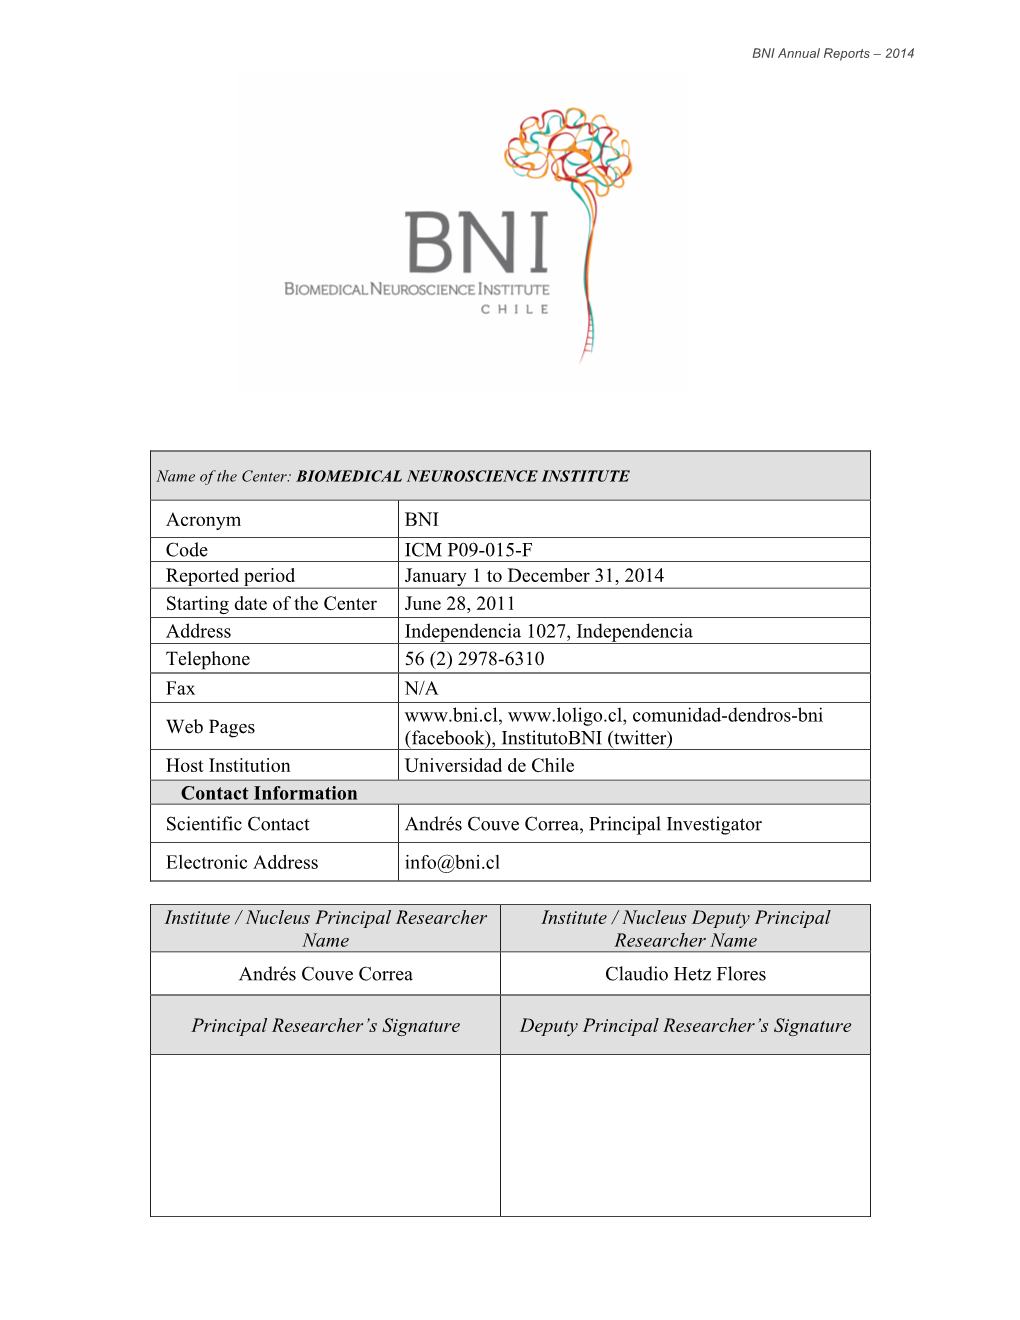 Acronym BNI Code ICM P09-015-F Reported Period January 1 to December 31, 2014 Starting Date of the Center June 28, 2011 Address